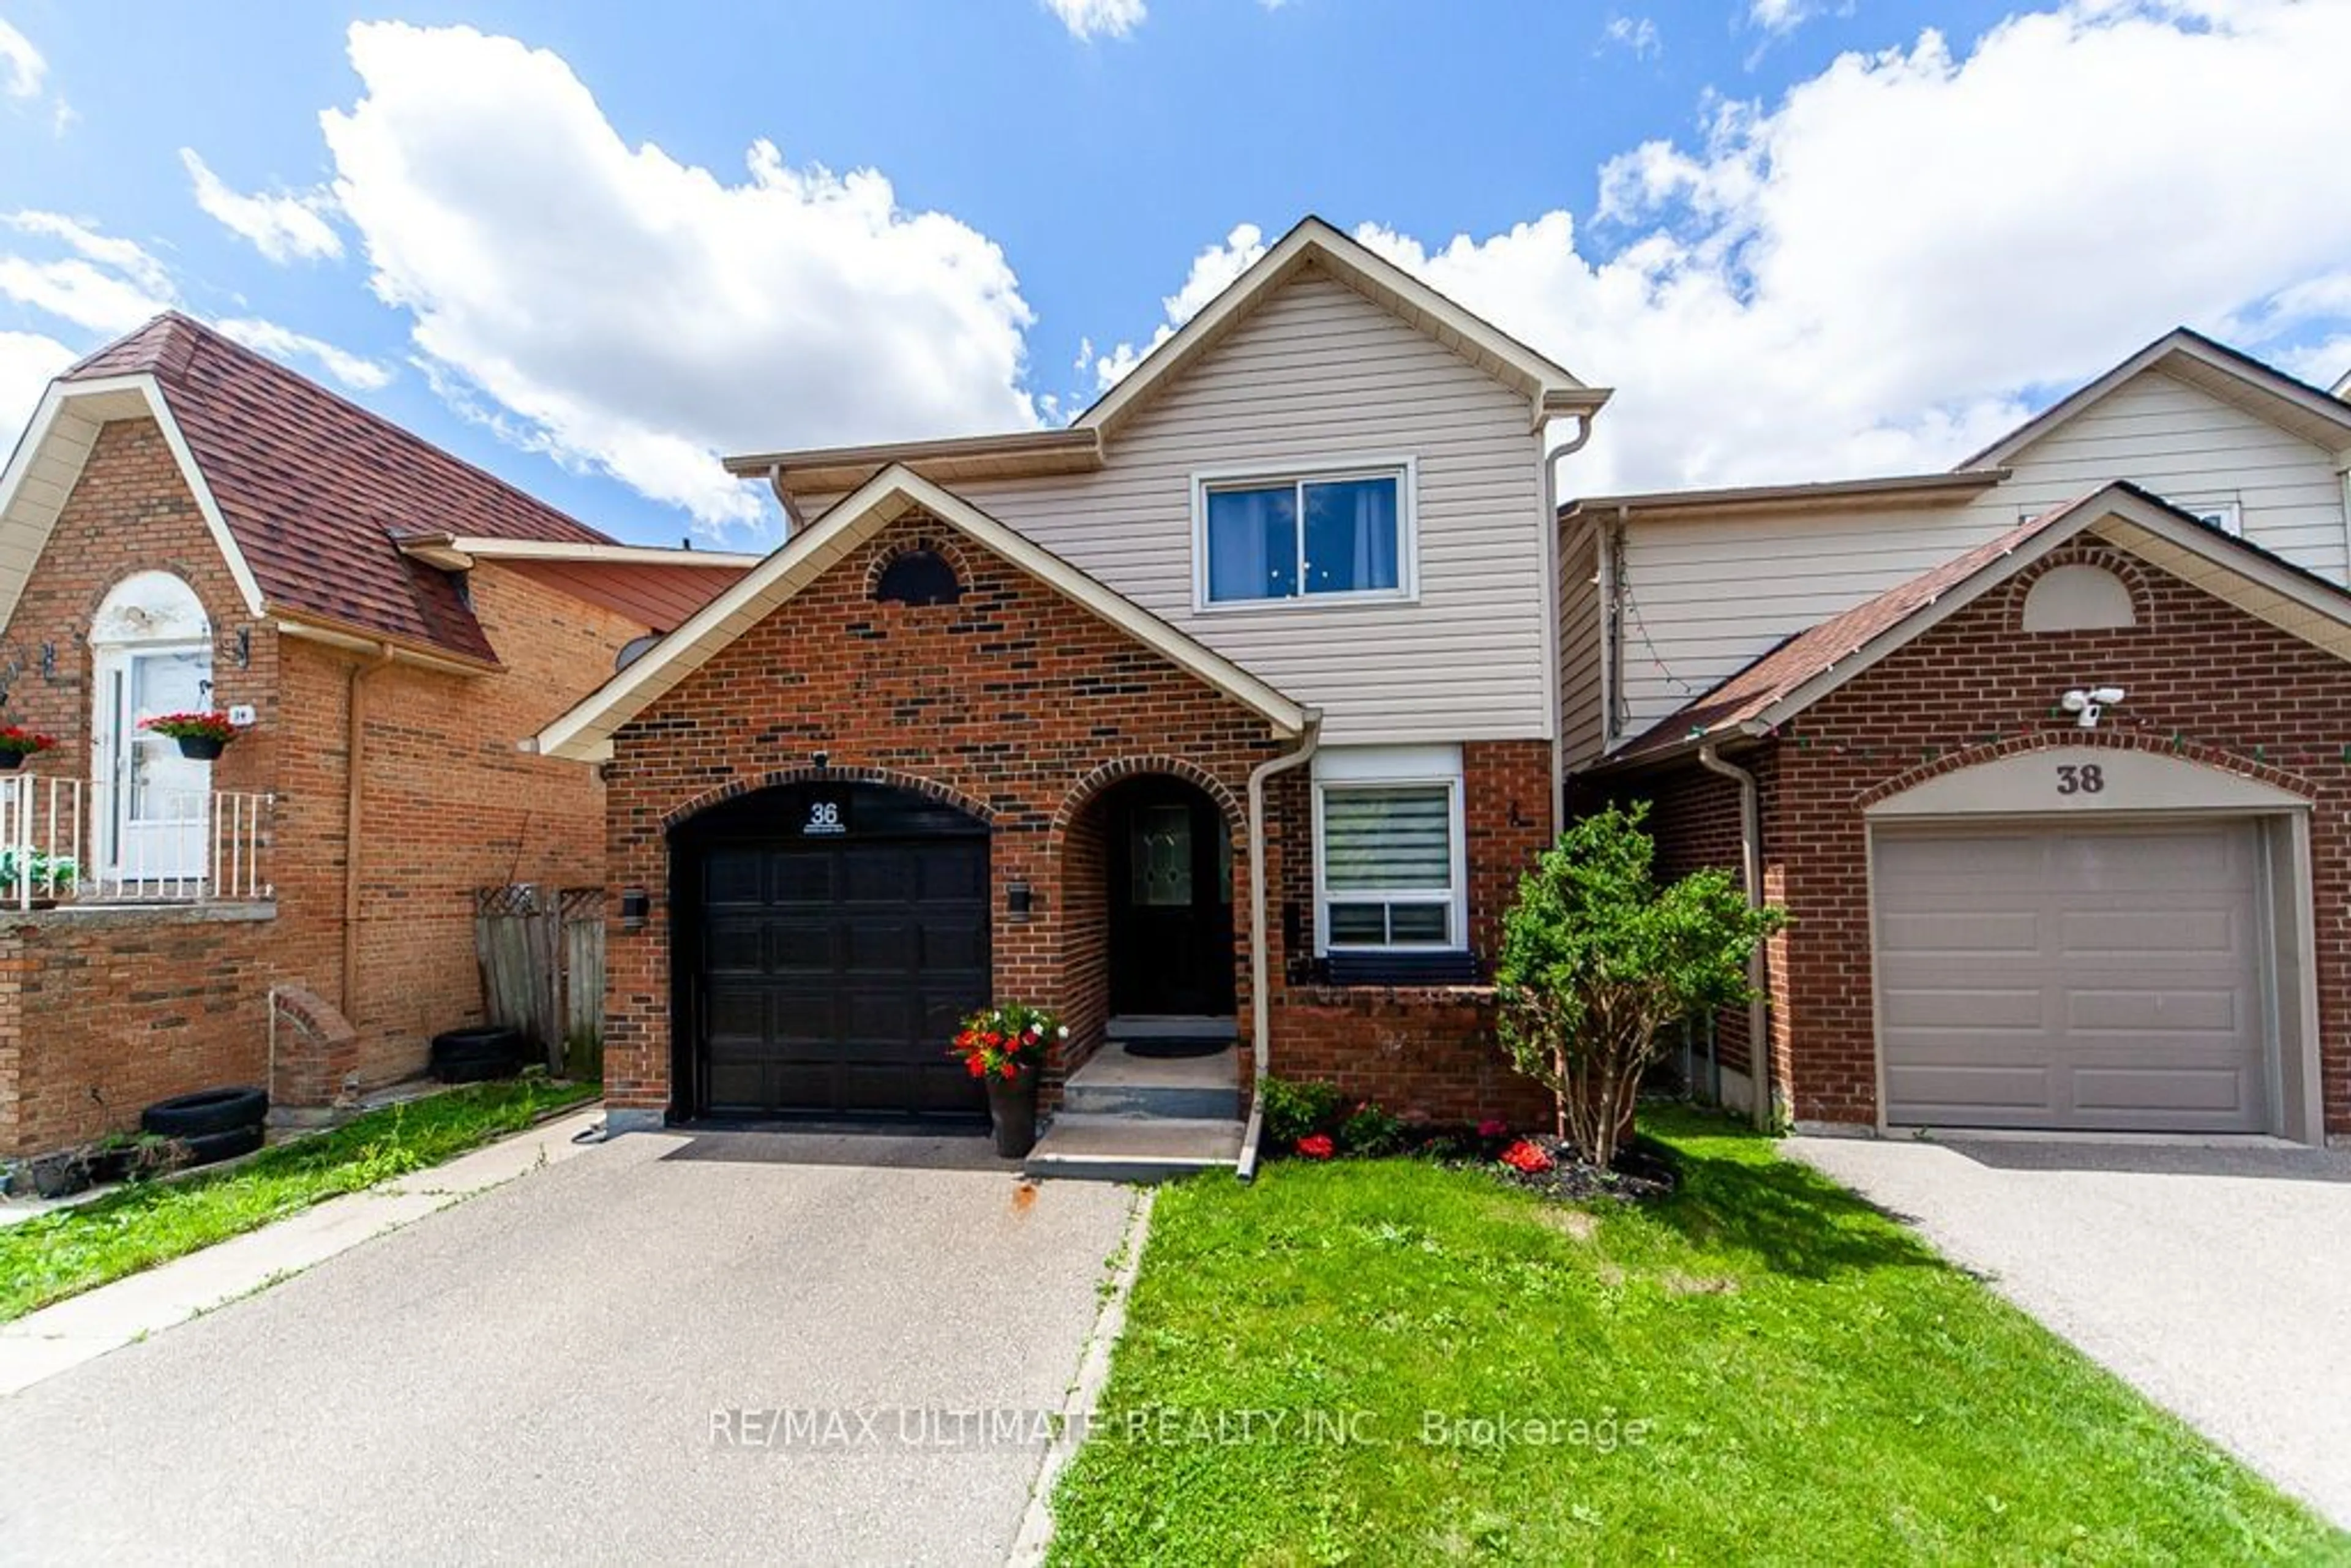 Home with brick exterior material for 36 Buckland Way, Brampton Ontario L6V 3P4